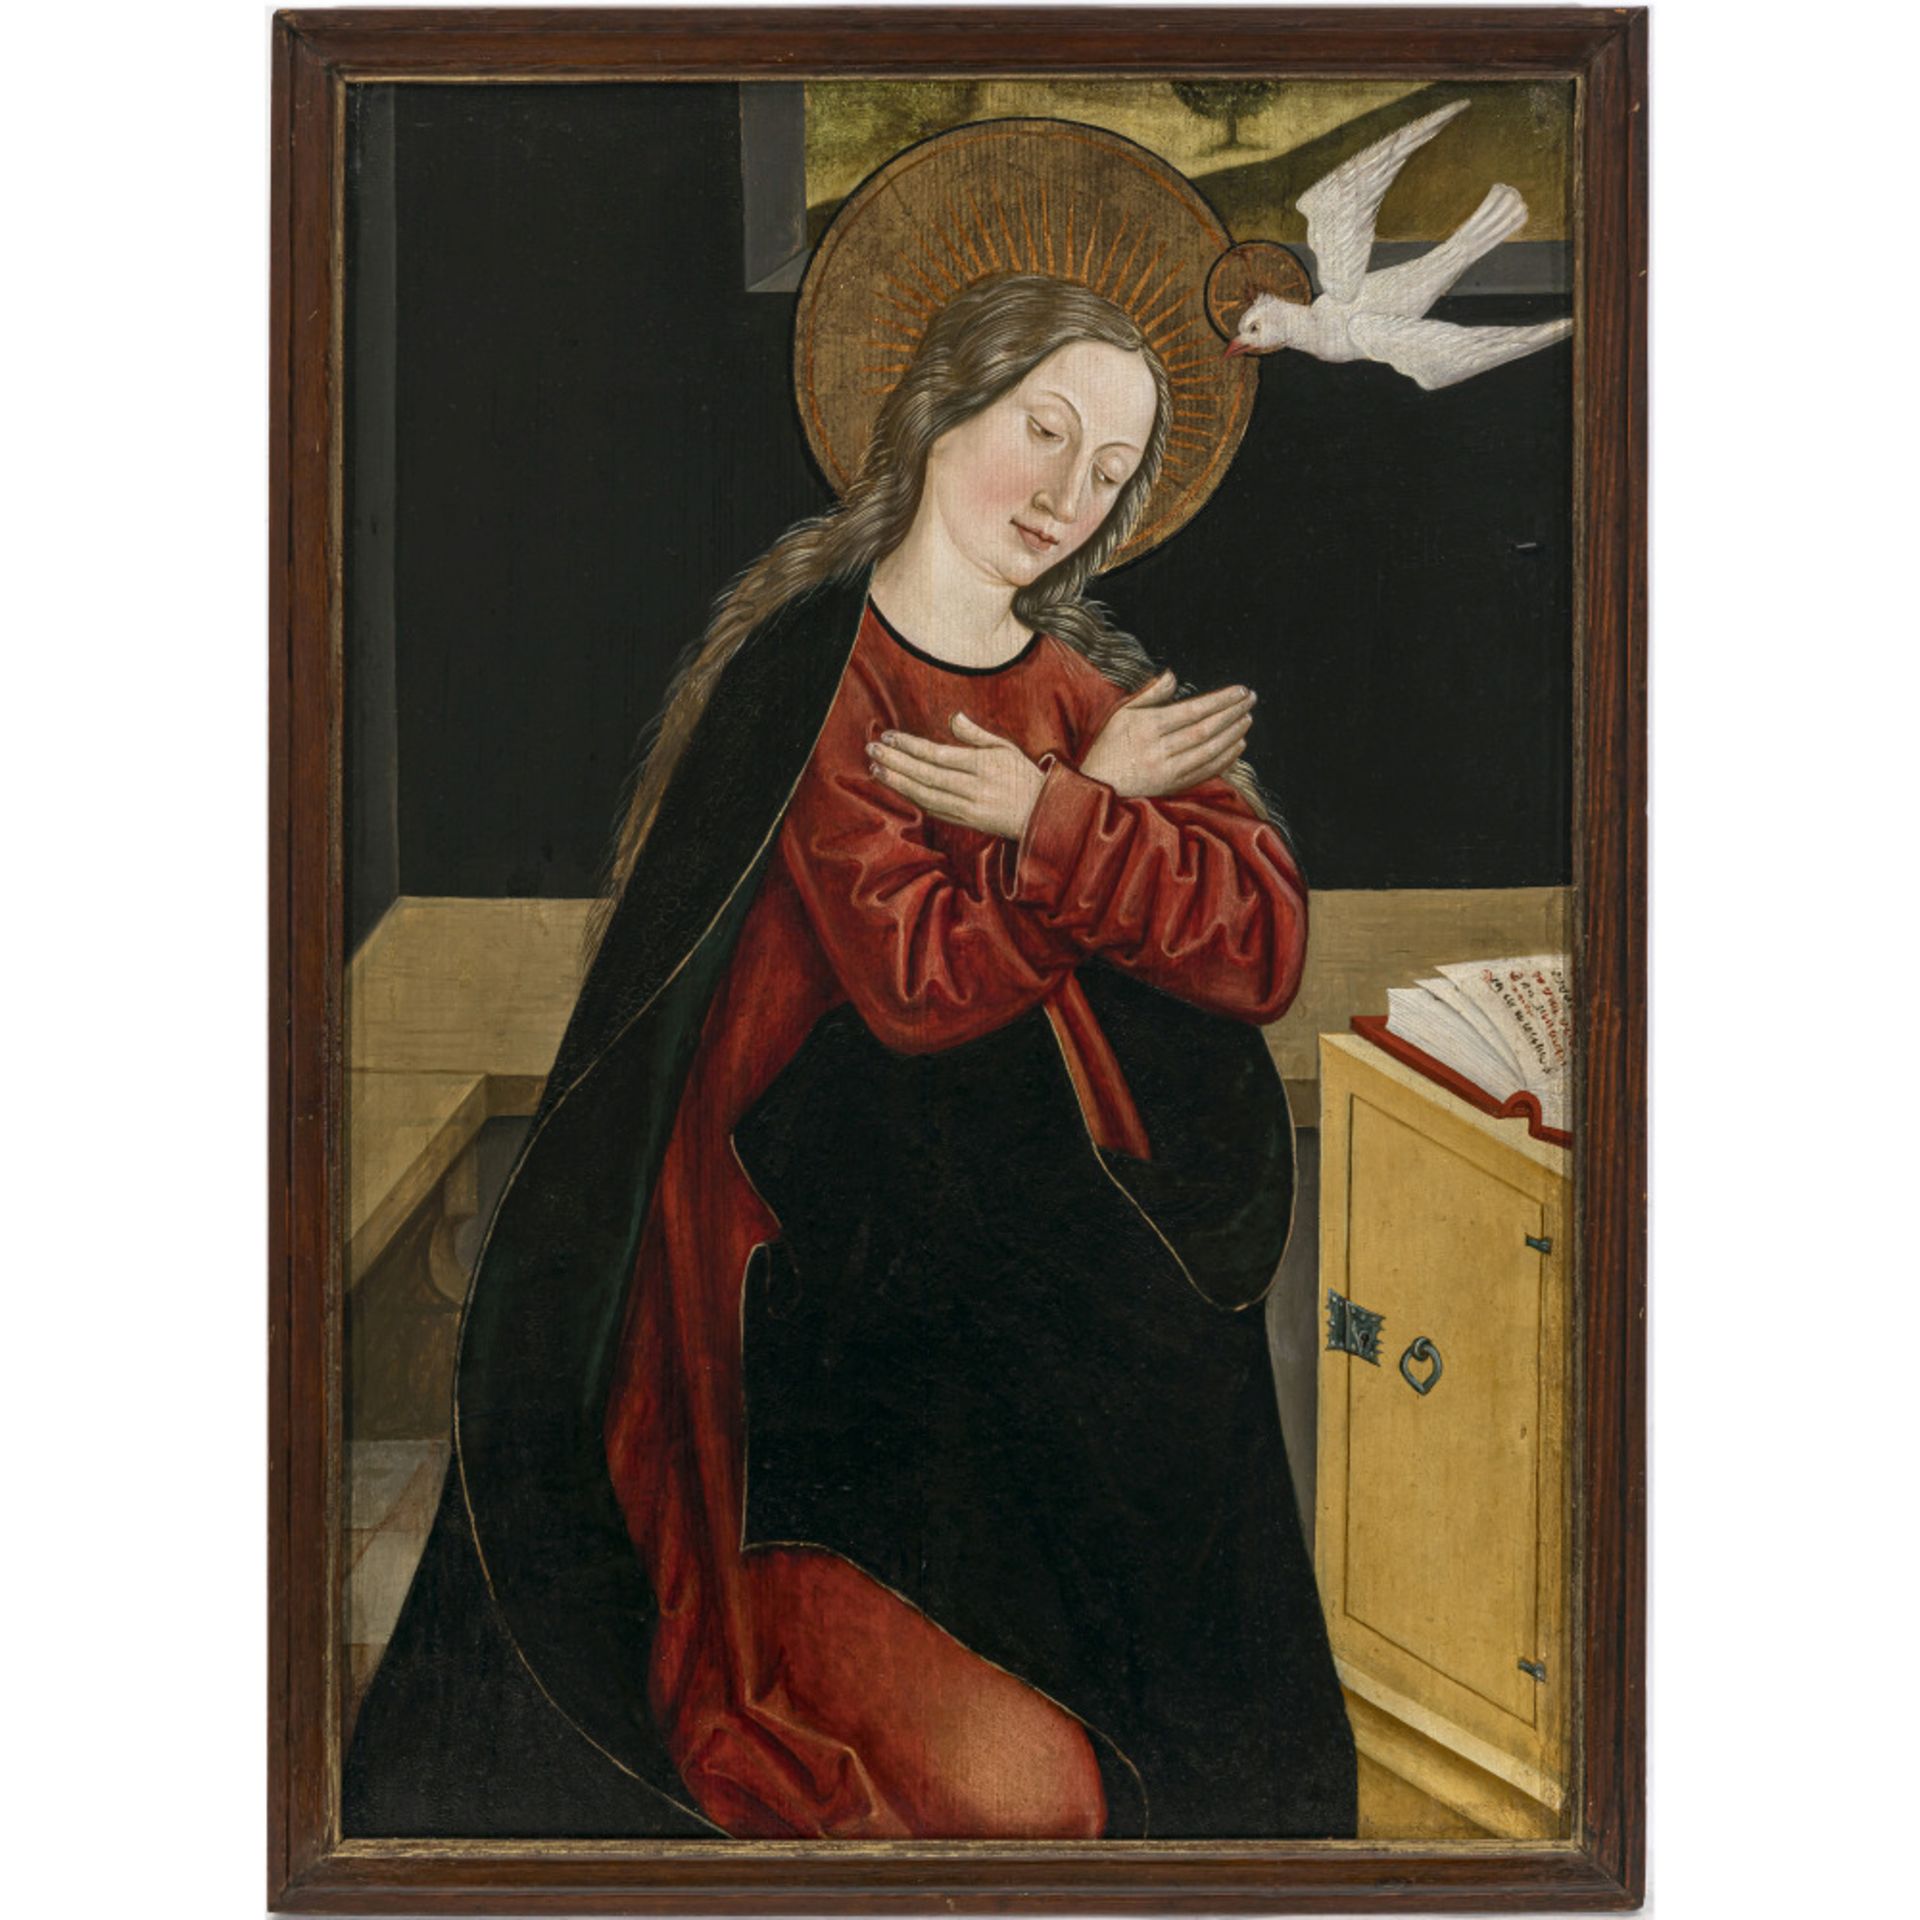 Claus Strigel - Two panels with the Annunciation - Image 2 of 5